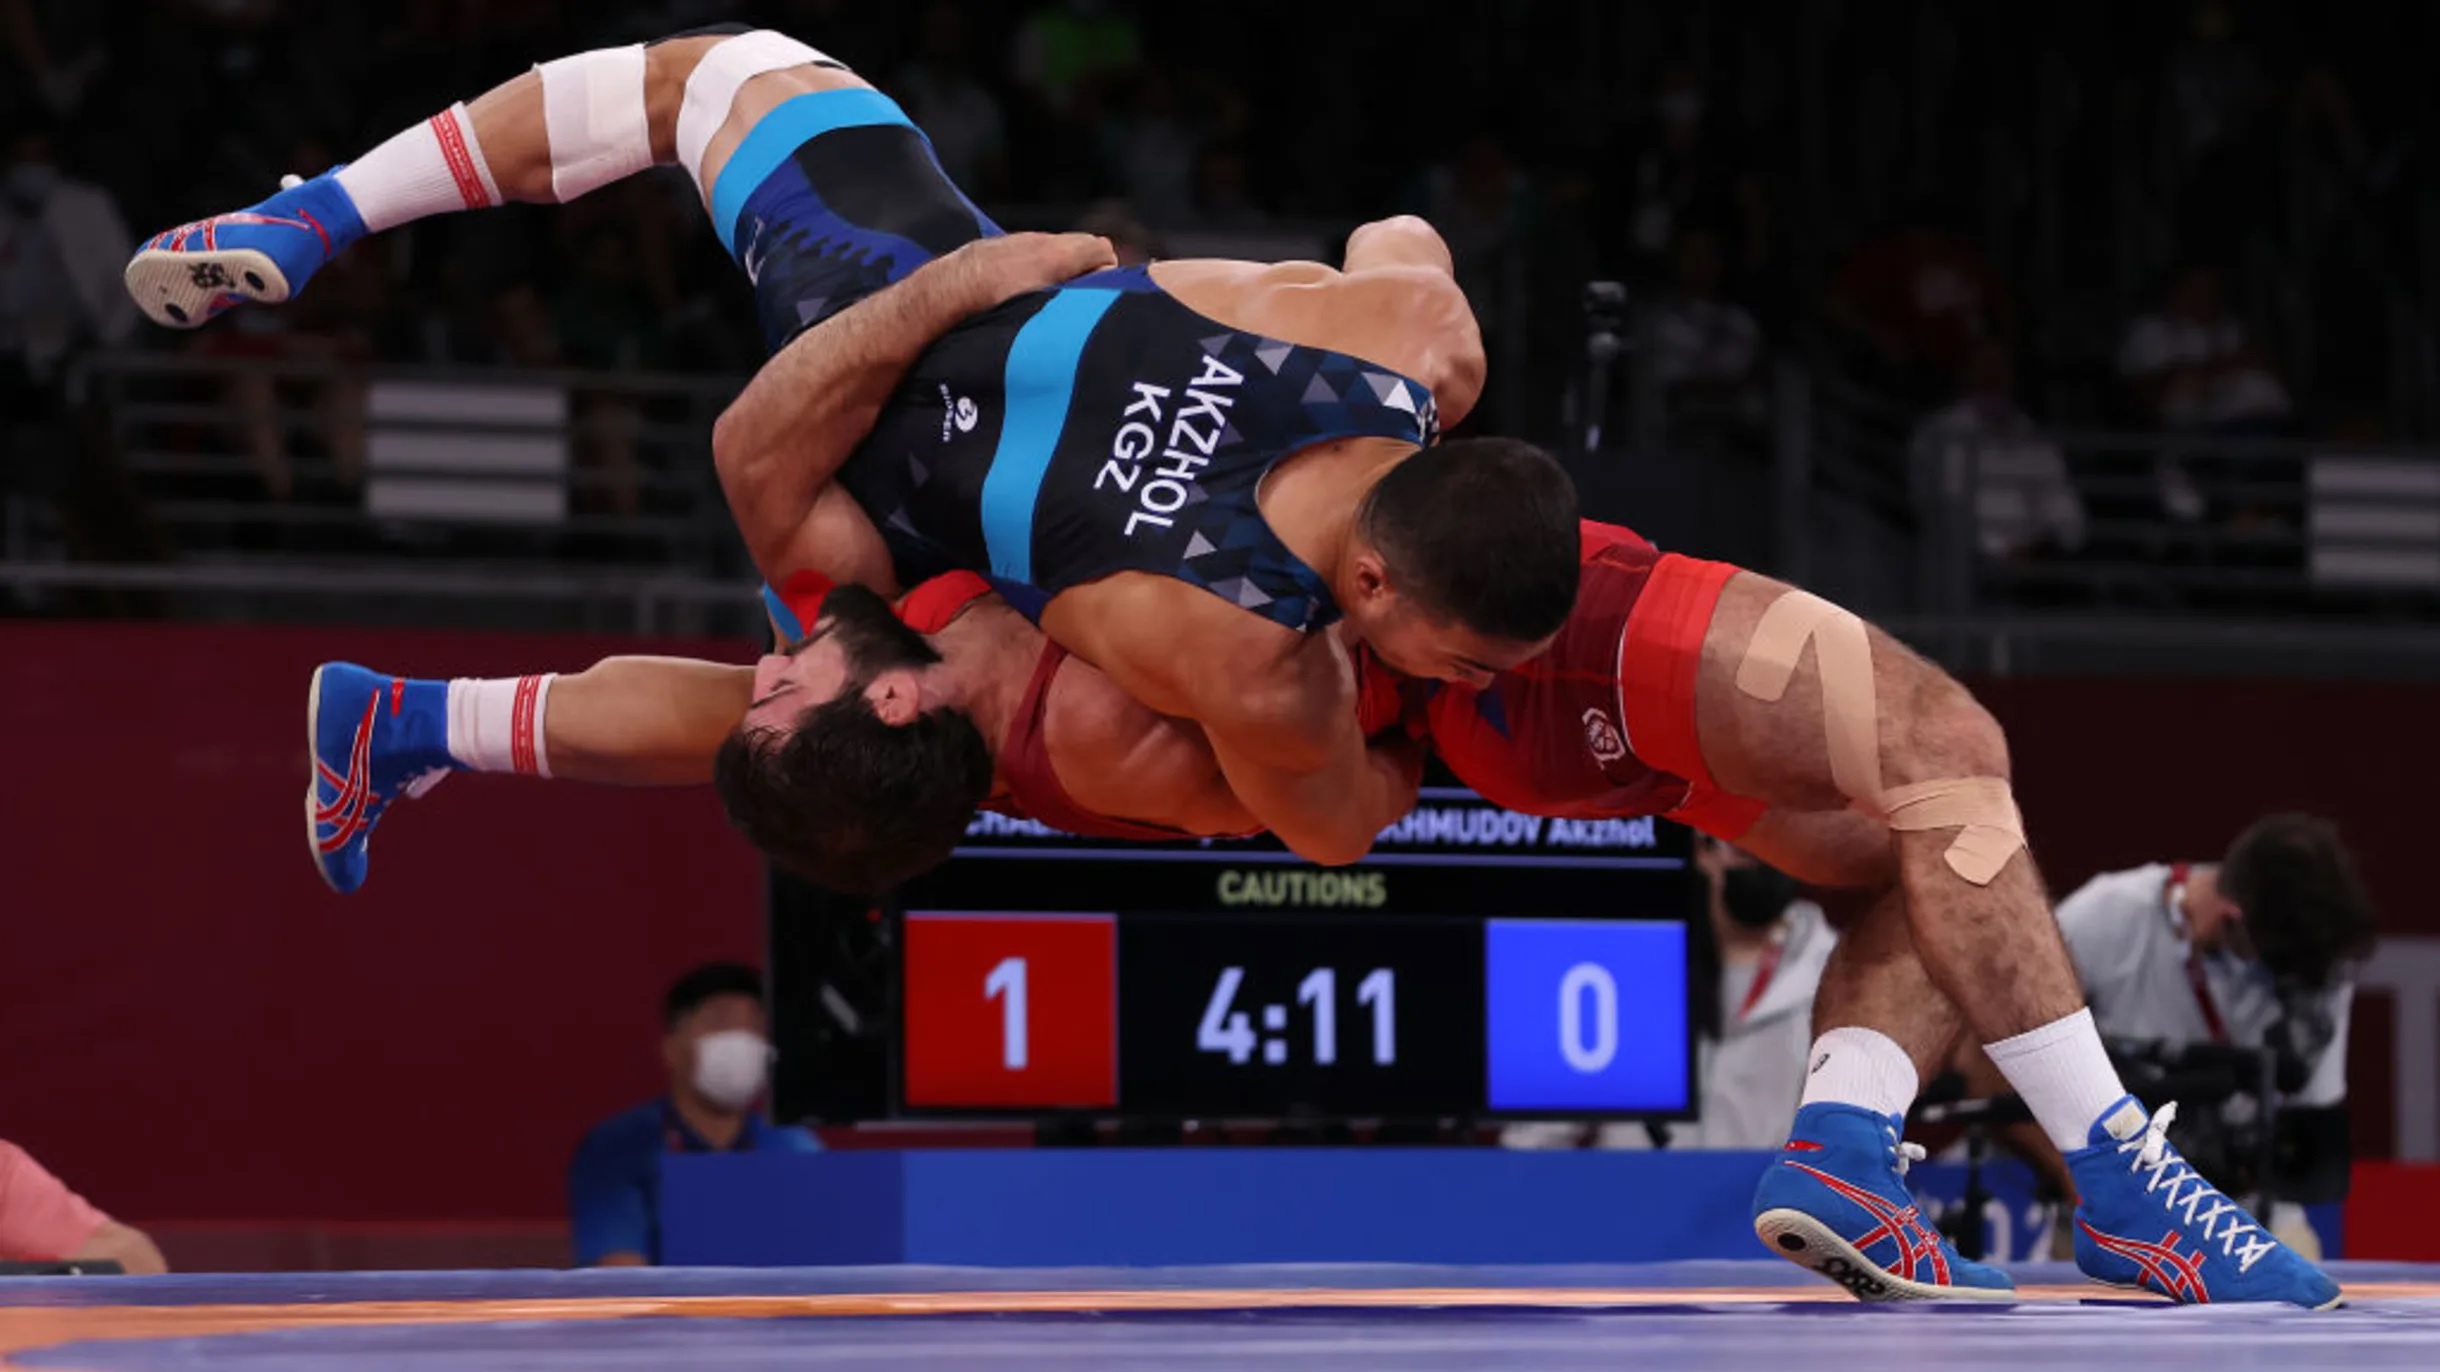 Kazakh Wrestlers Win Four Medals at Asian Wrestling Championships The